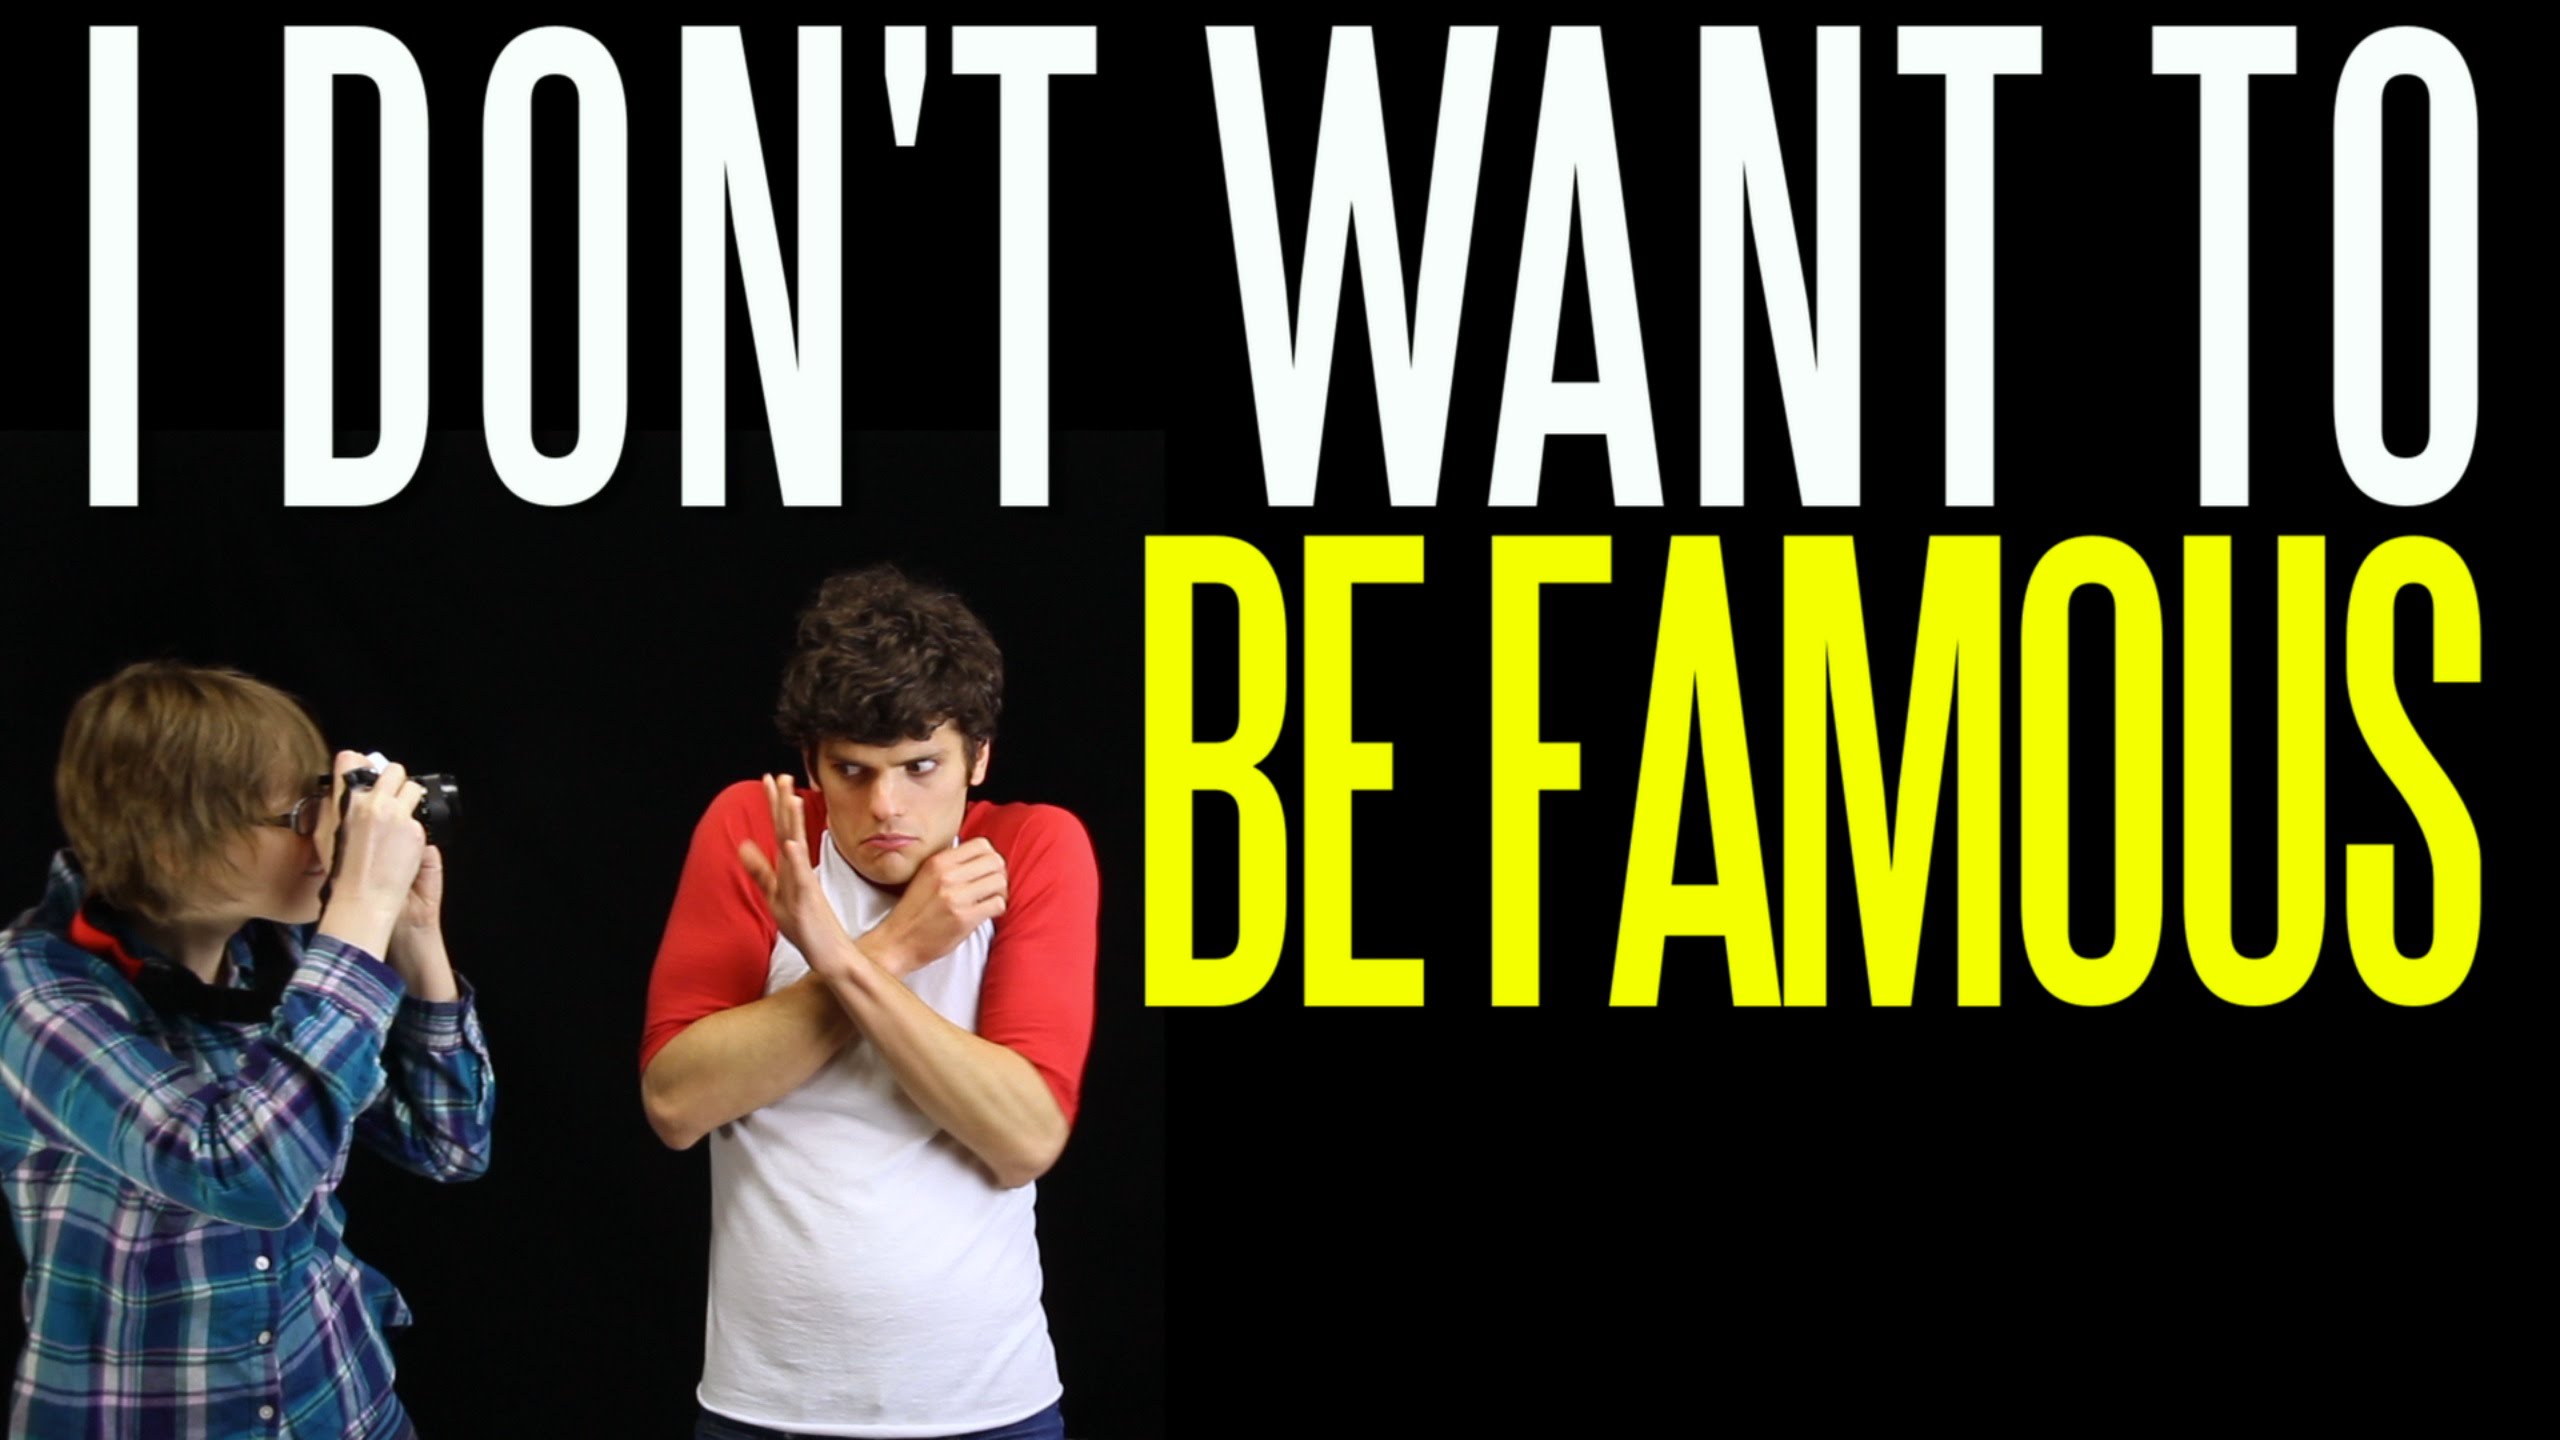 I Don't Want to Be Famous - YouTube